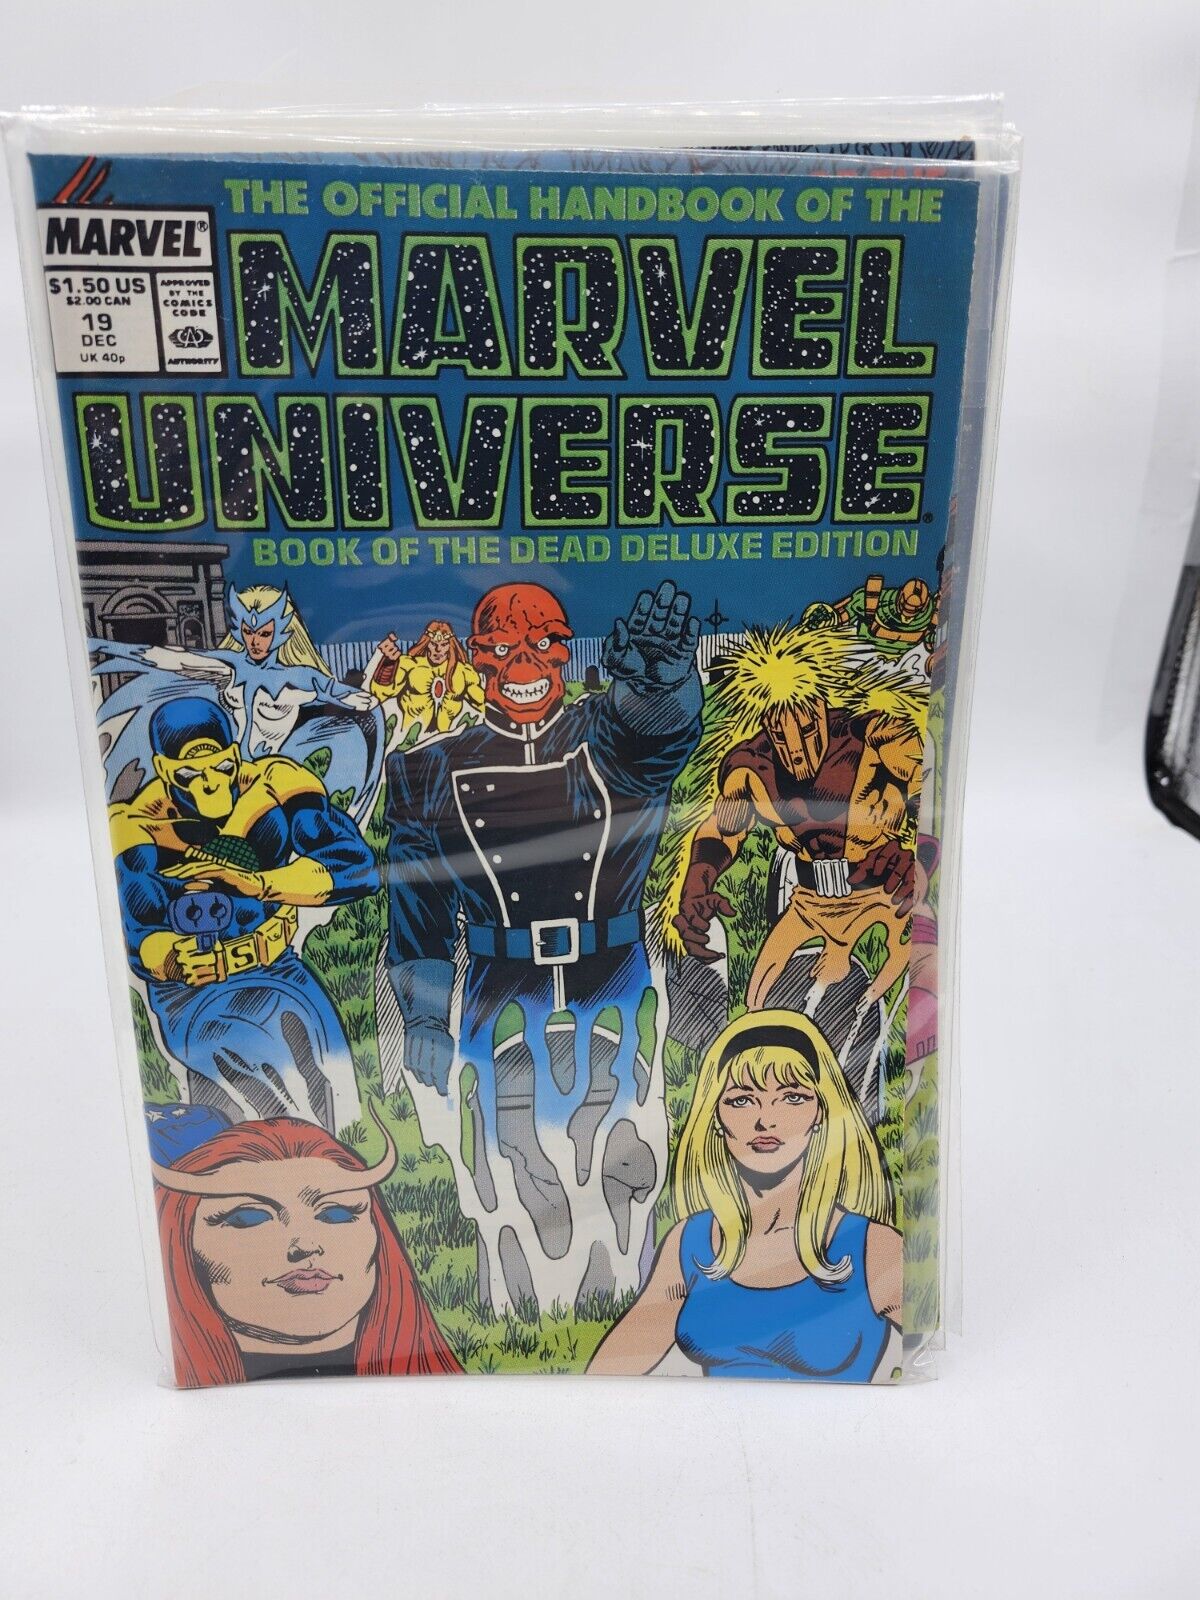 THE OFFICIAL HANDBOOK OF THE MARVEL UNIVERSE BOOK OF THE DEAD DELUXE EDITION #19